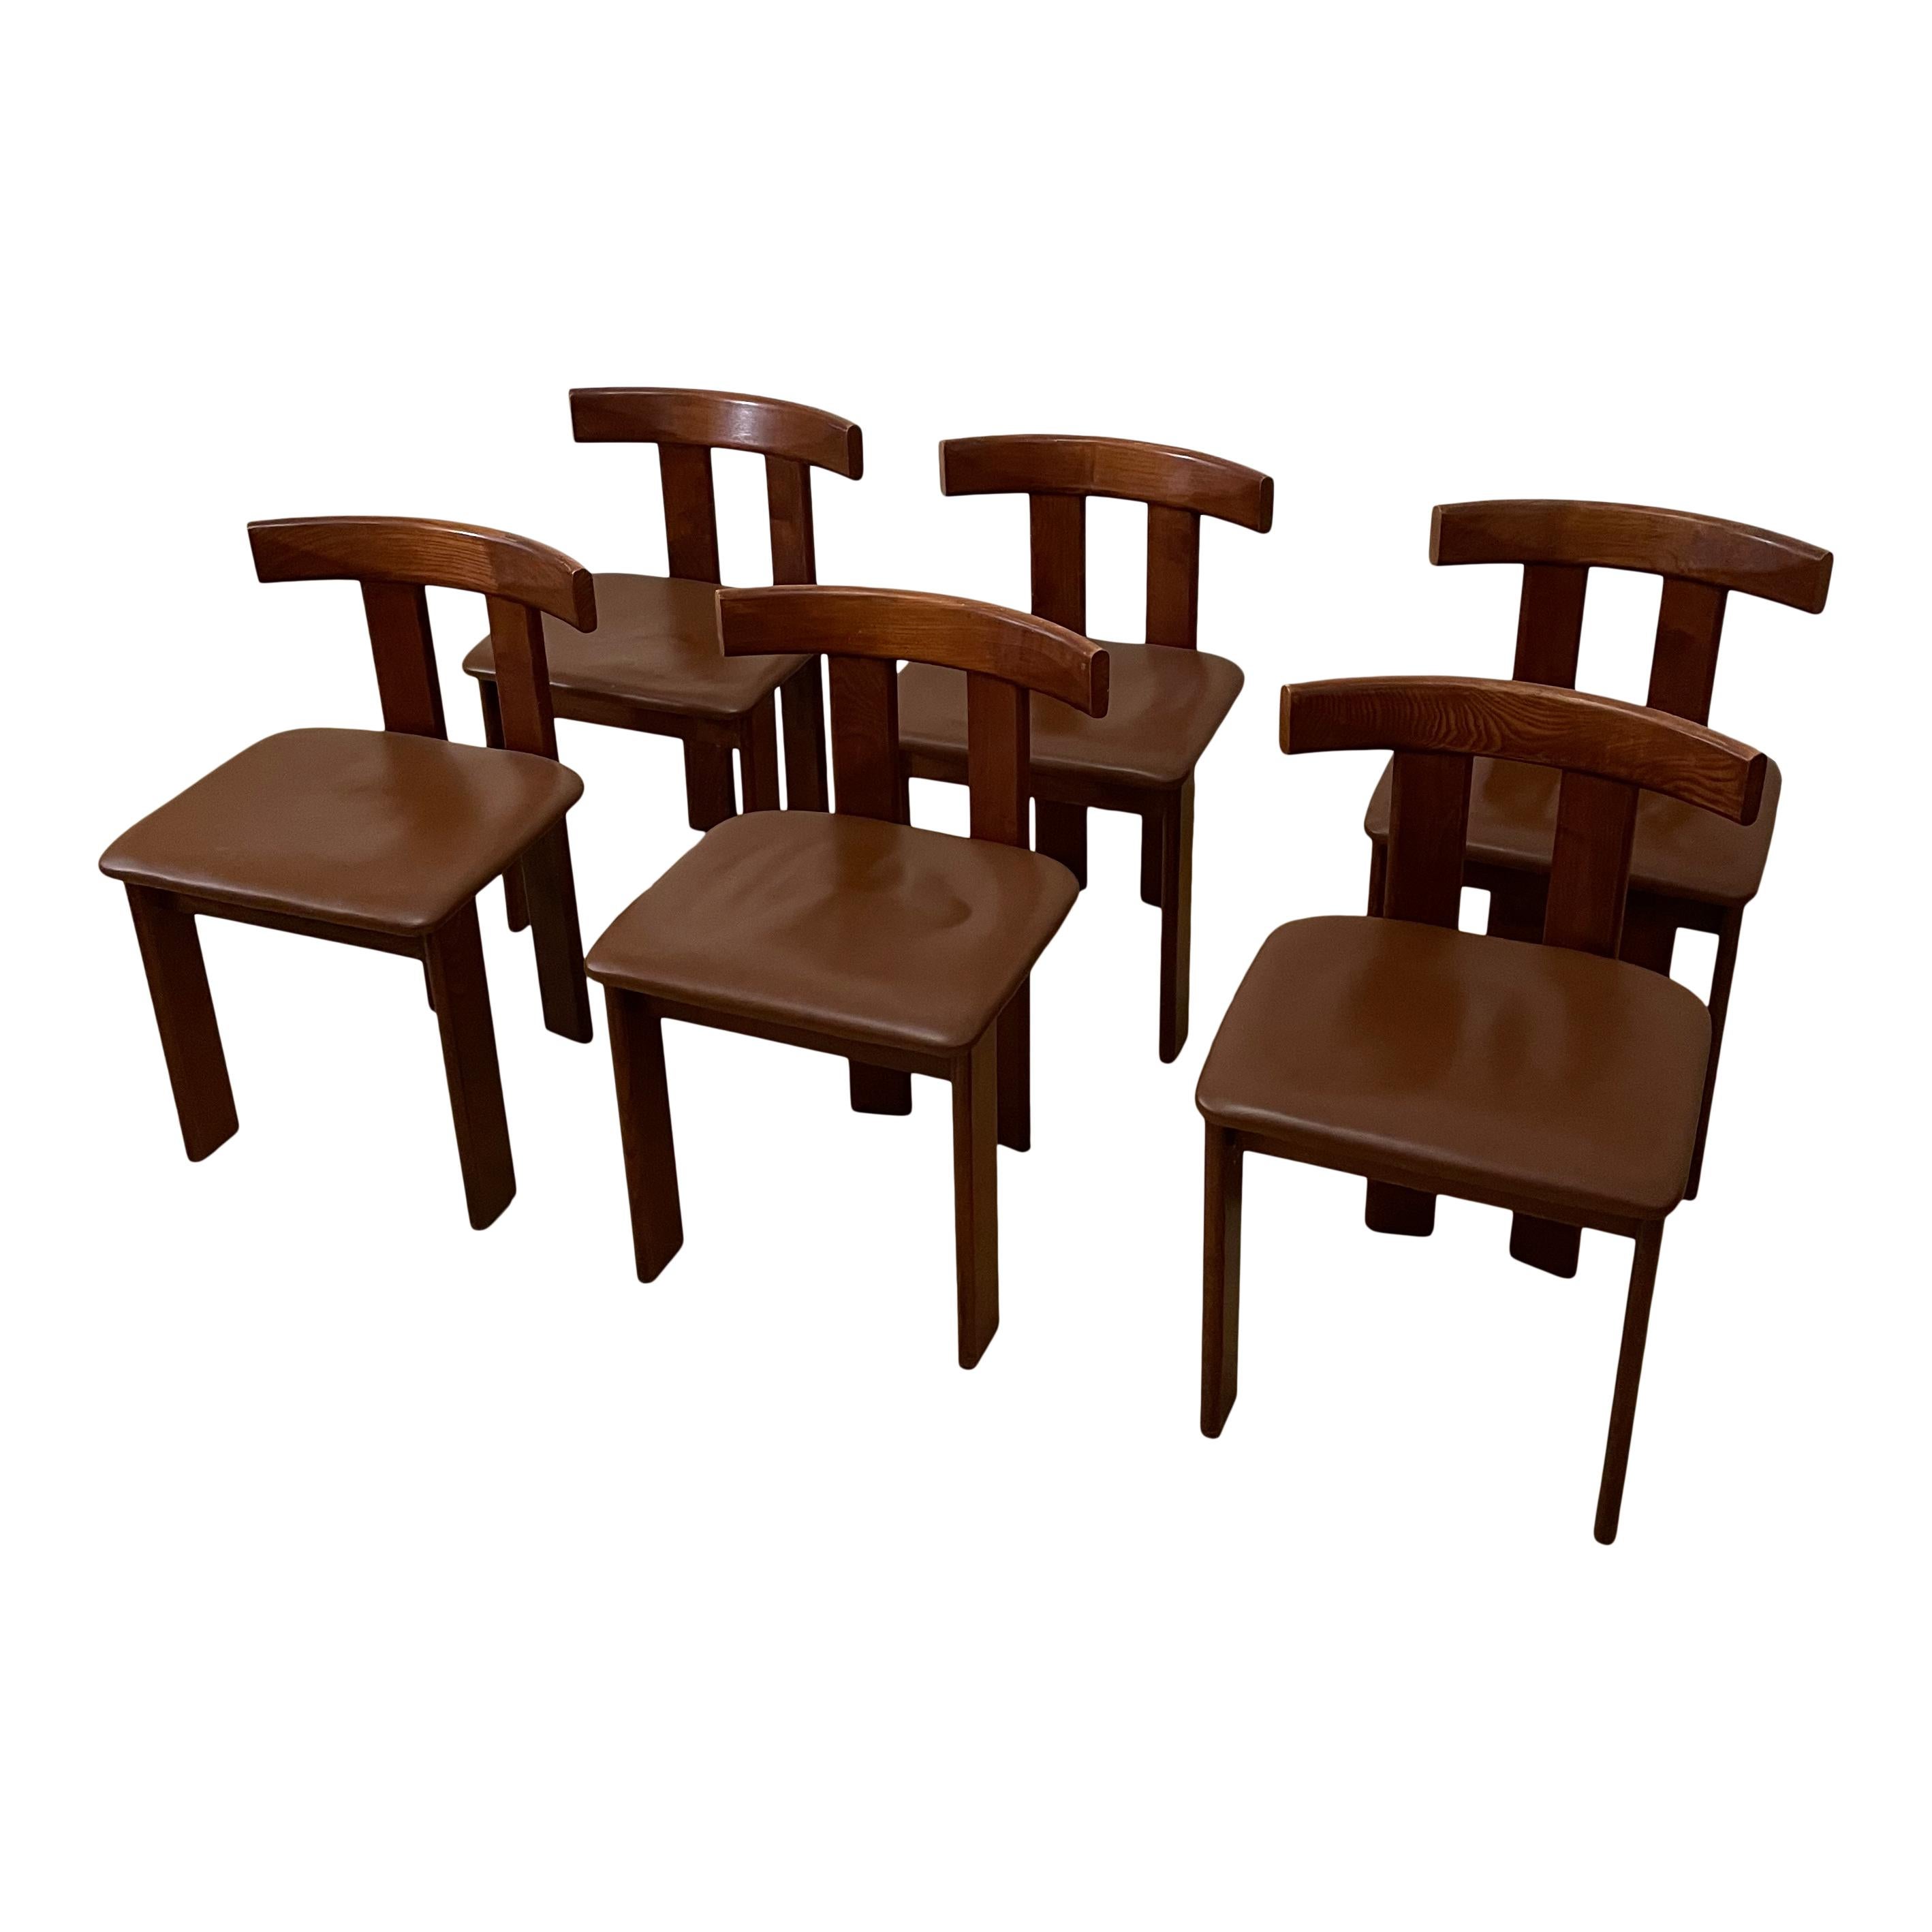 This set of six dining chairs was designed and manufactured in Italy during the 1970s, showcasing a walnut structure and leather seaters. 
These chairs remain in excellent vintage condition and are a testament to the quality and craftsmanship of the